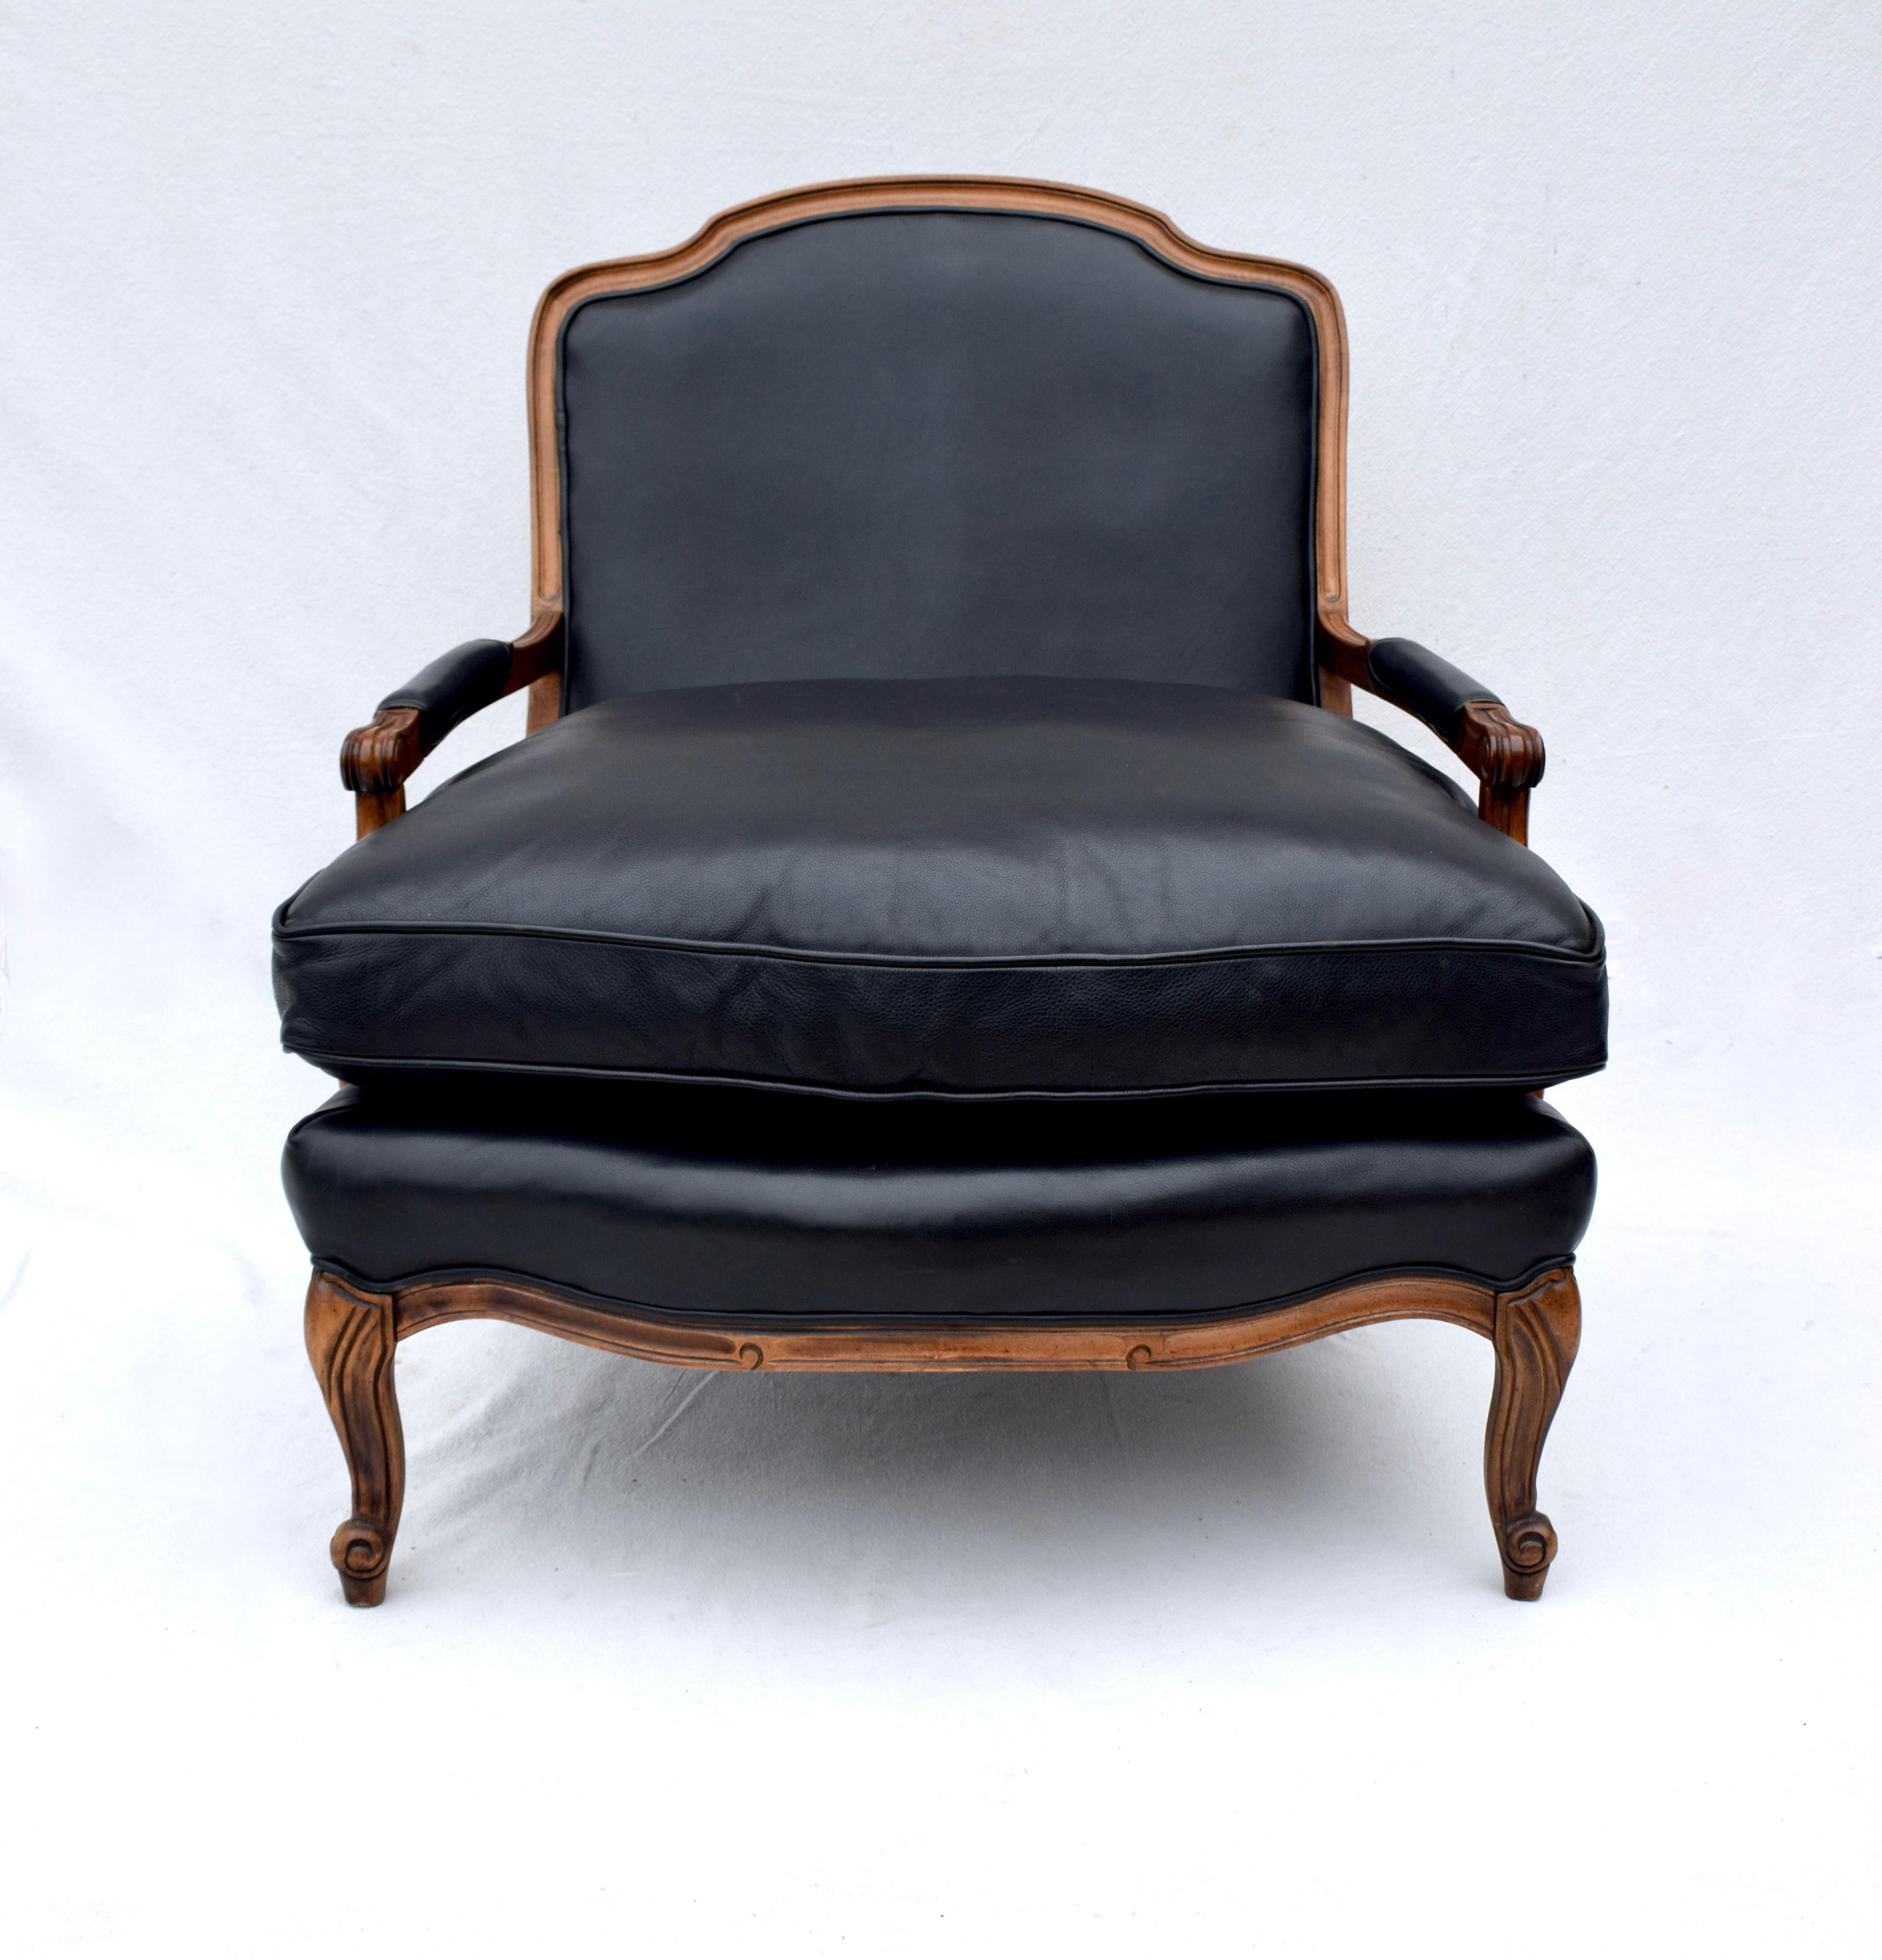 Woodward & Lothrop Top of the Line Black Leather and Walnut Club Chair & Ottoman 2